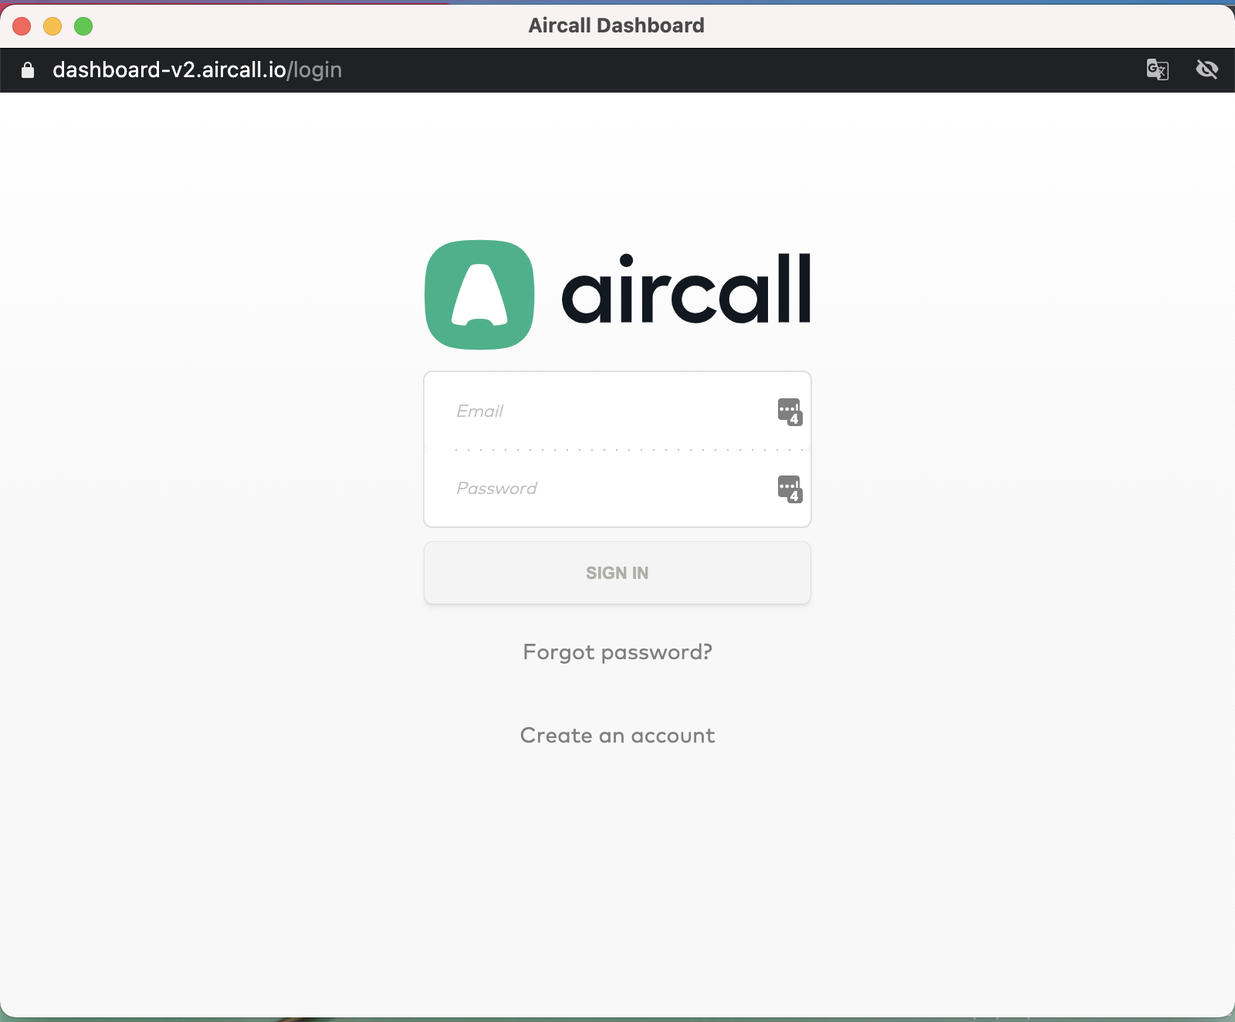 Authorize Aircall 1